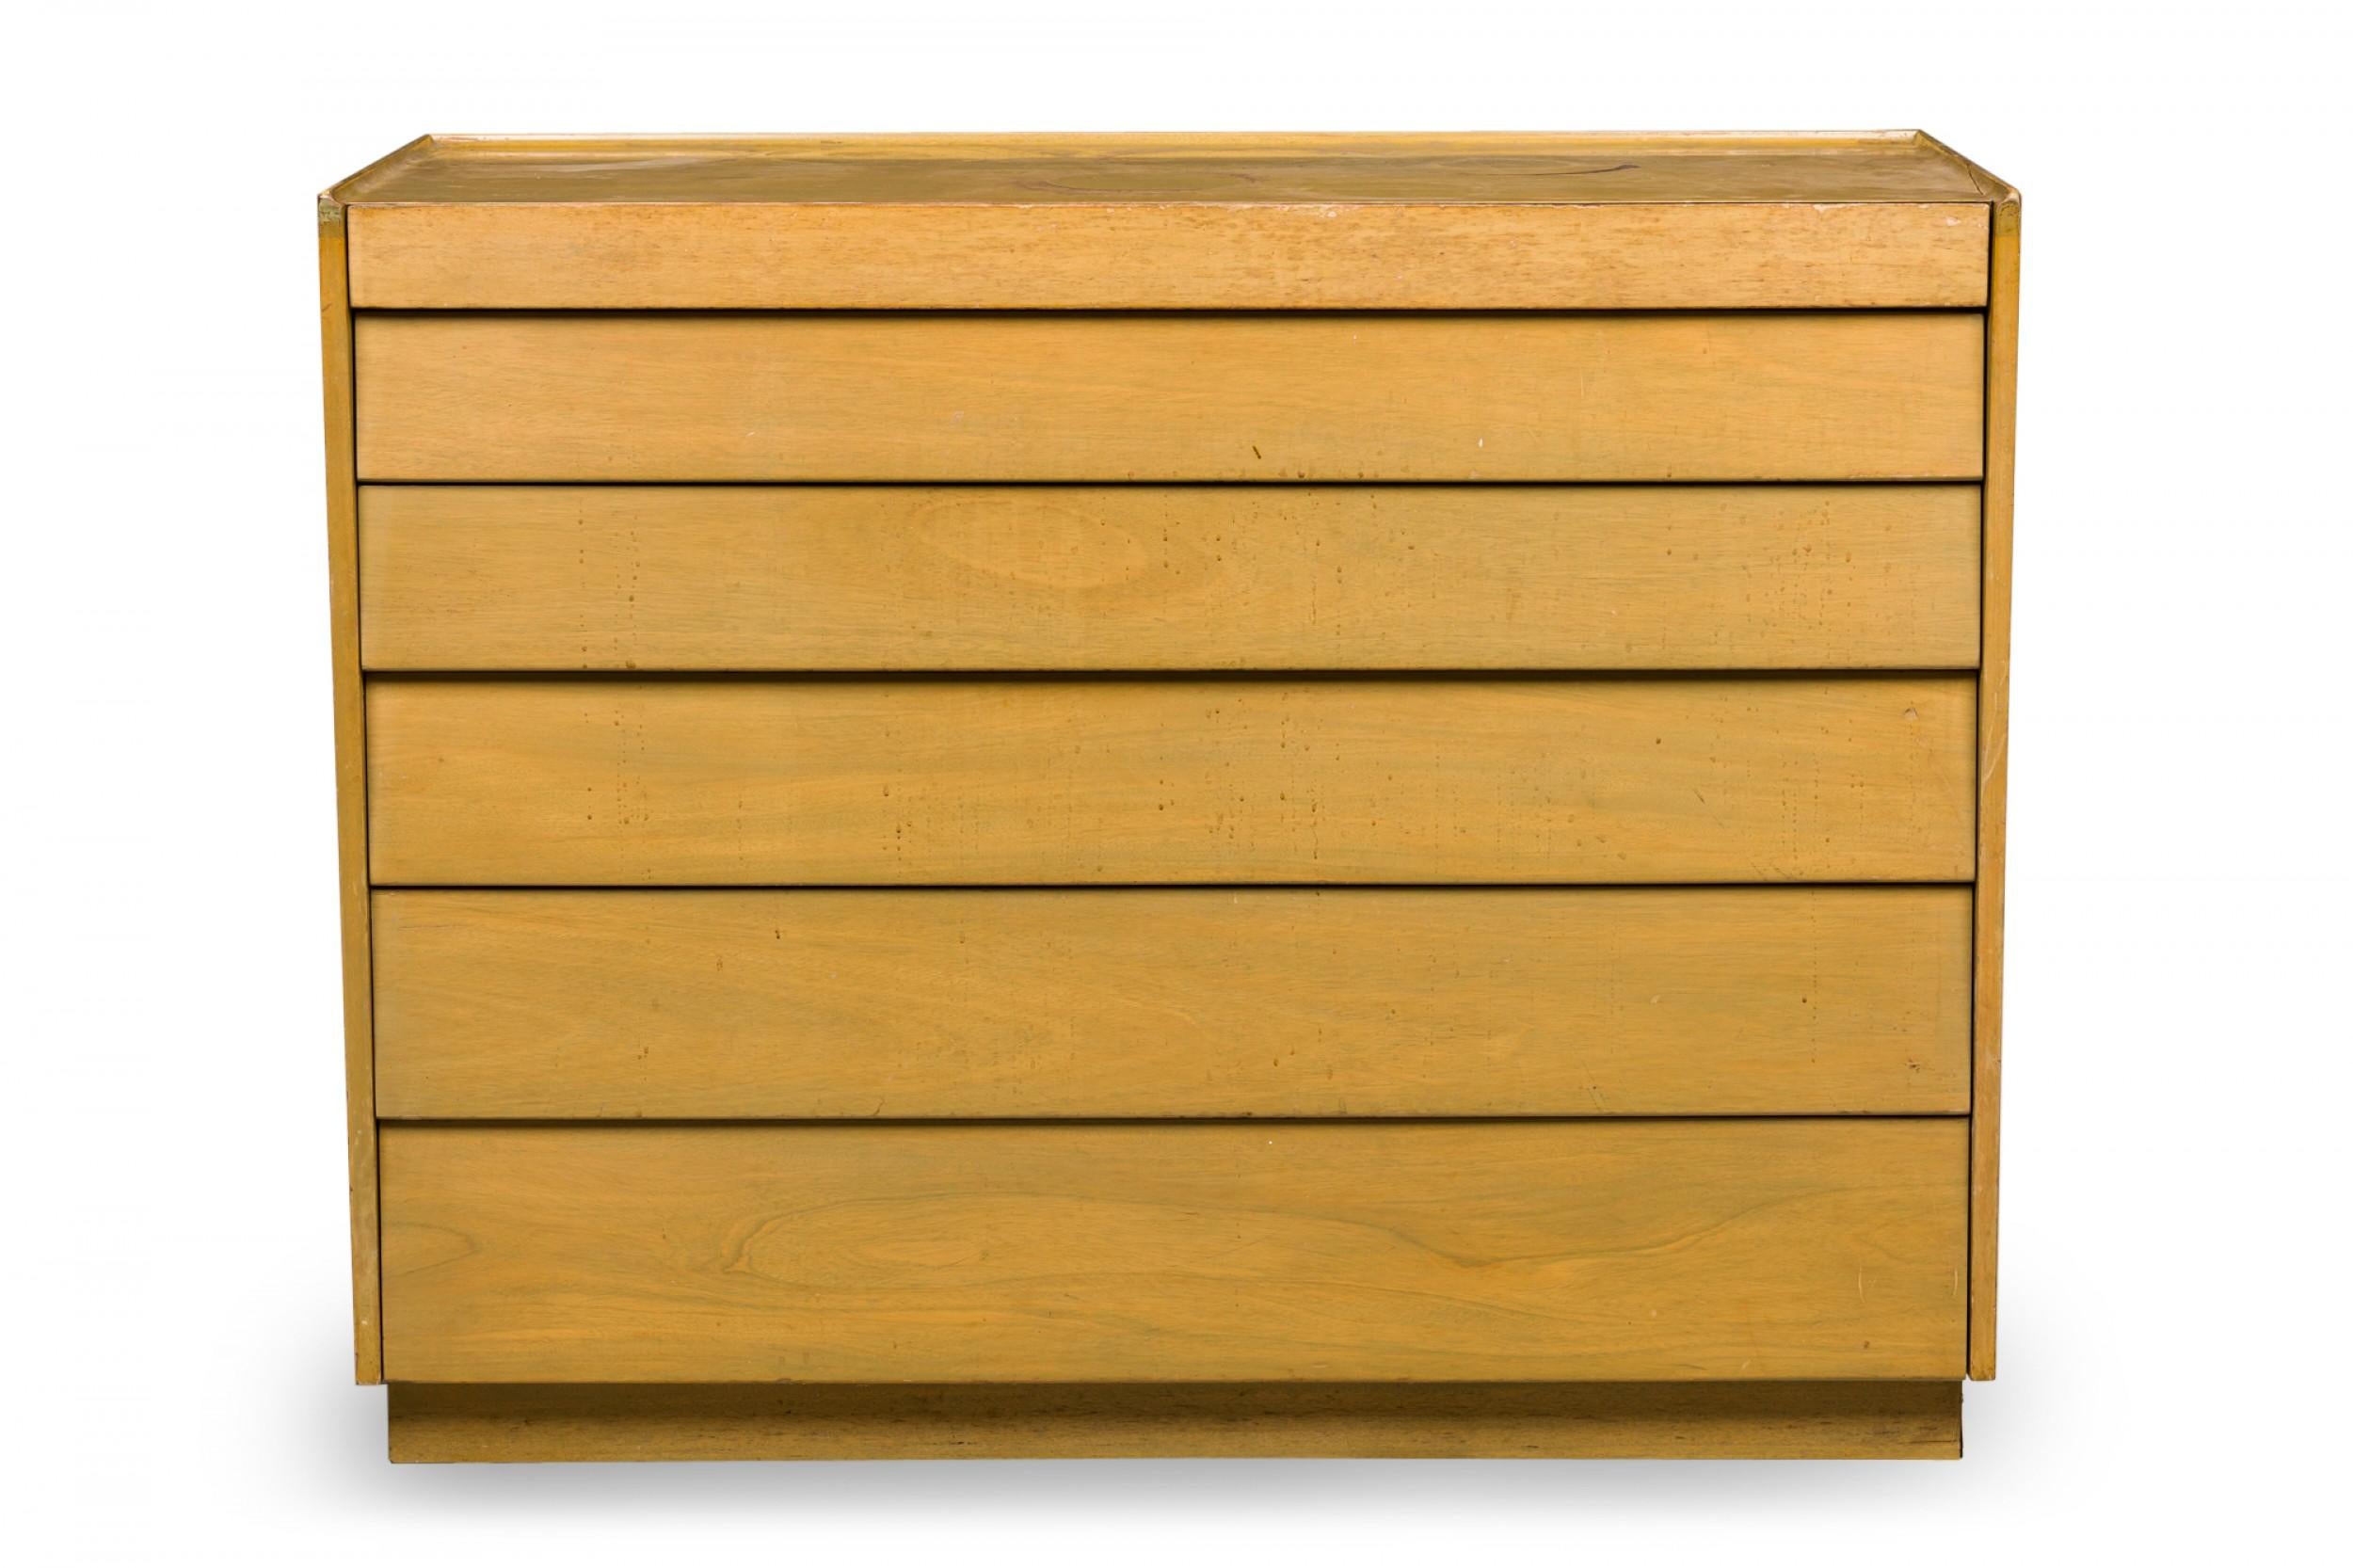 American mid-century maple louver front chest with 6 drawers in descending size. (EDWARD WORMLEY FOR DUNBAR FURNITURE COMPANY)
 